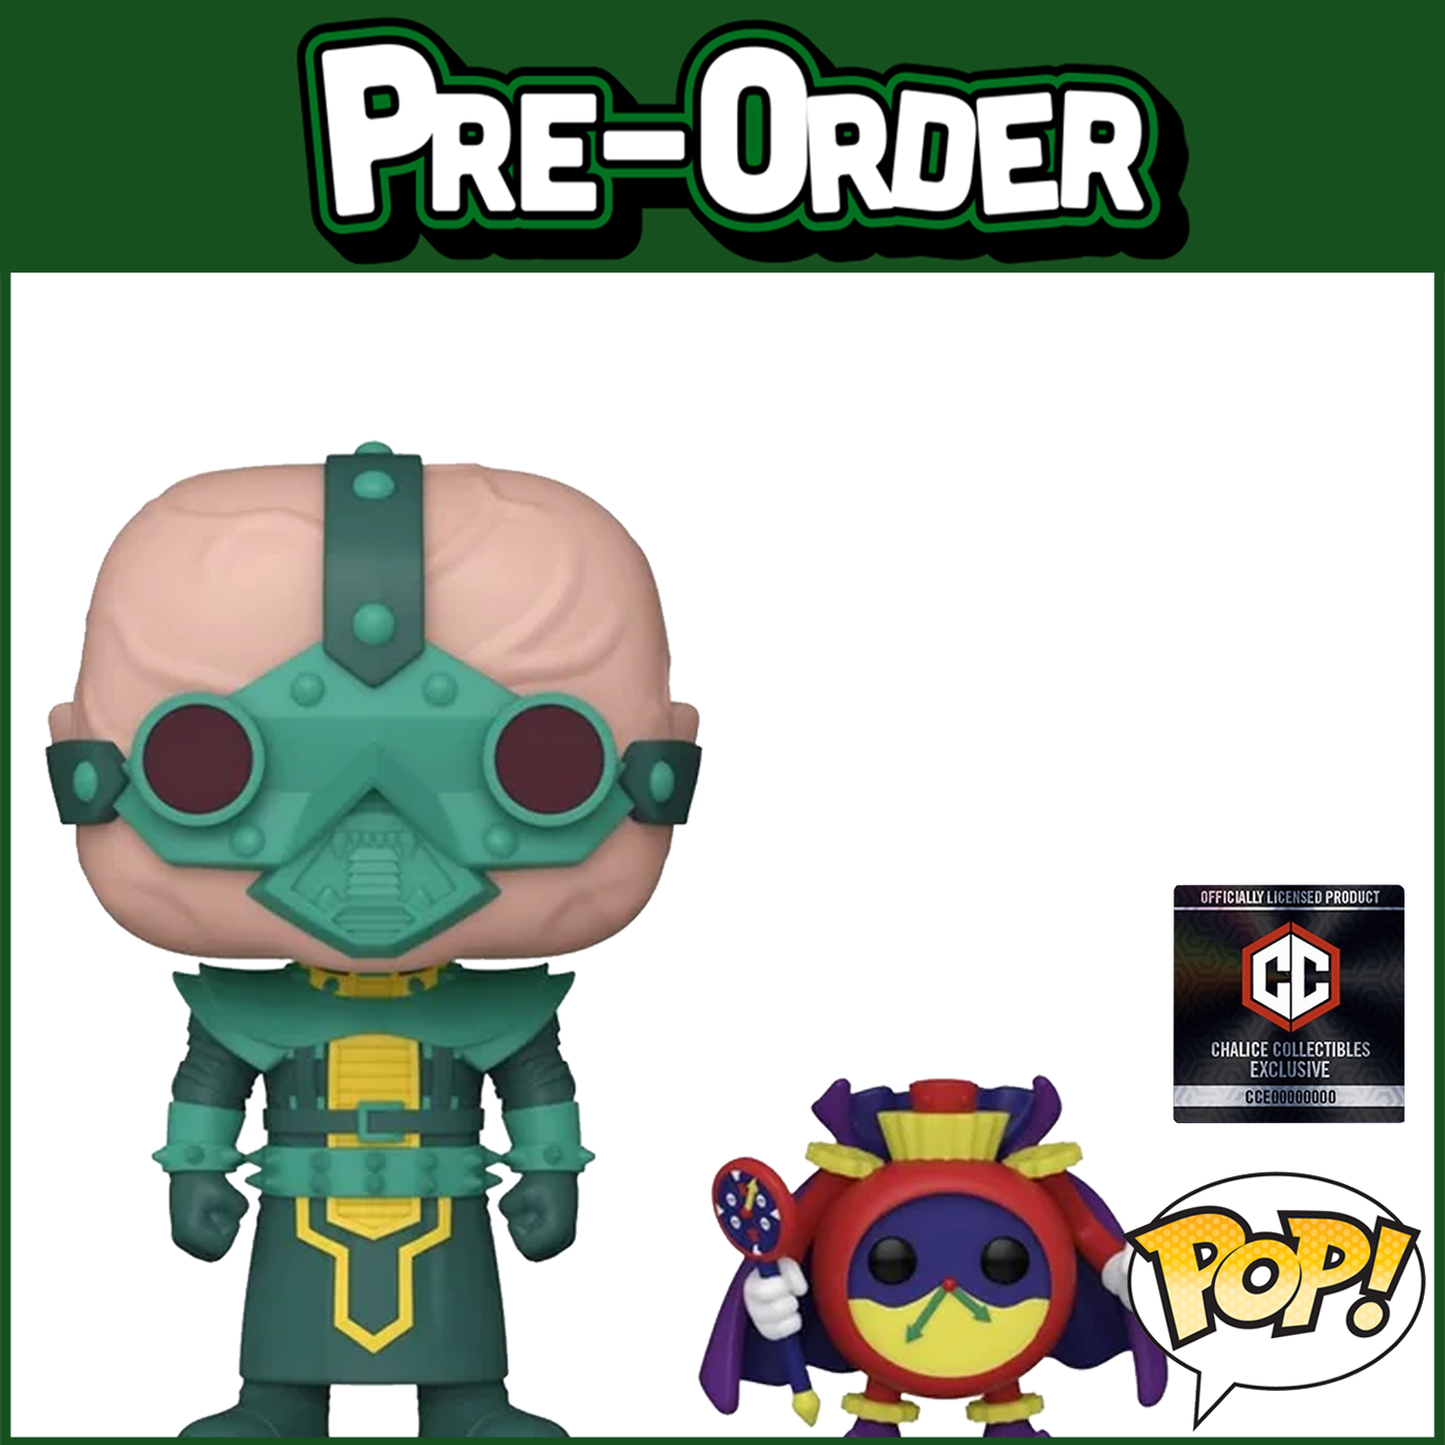 (PRE-ORDER) Funko POP! Animation: Yu-Gi-Oh! - Jinzo with Time Wizard (Chalice Collectibles) #1458